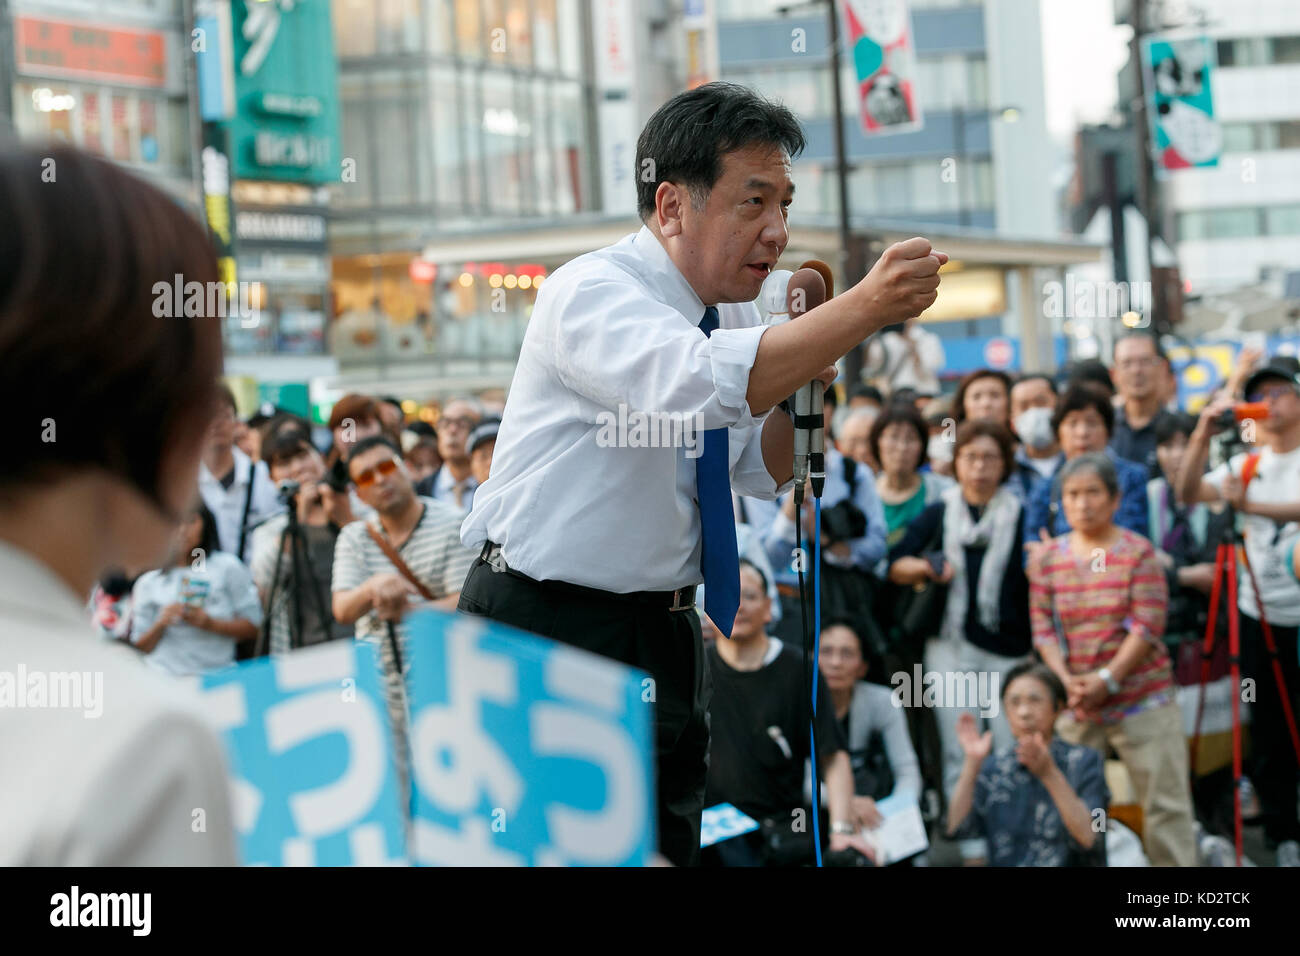 Tokyo, Japan. 10th Oct, 2017. Yukio Edano, leader of the Constitutional Democratic Party of Japan, delivers a street speech outside Ikebukuro Station on October 10, 2017, Tokyo, Japan. Edano, head of the newly created Constitutional Democratic Party (CDP) attended a campaign event to support his party's candidate Yosuke Suzuki. Campaigning officially started on October 10 for the October 22 election. Credit: Rodrigo Reyes Marin/AFLO/Alamy Live News Stock Photo